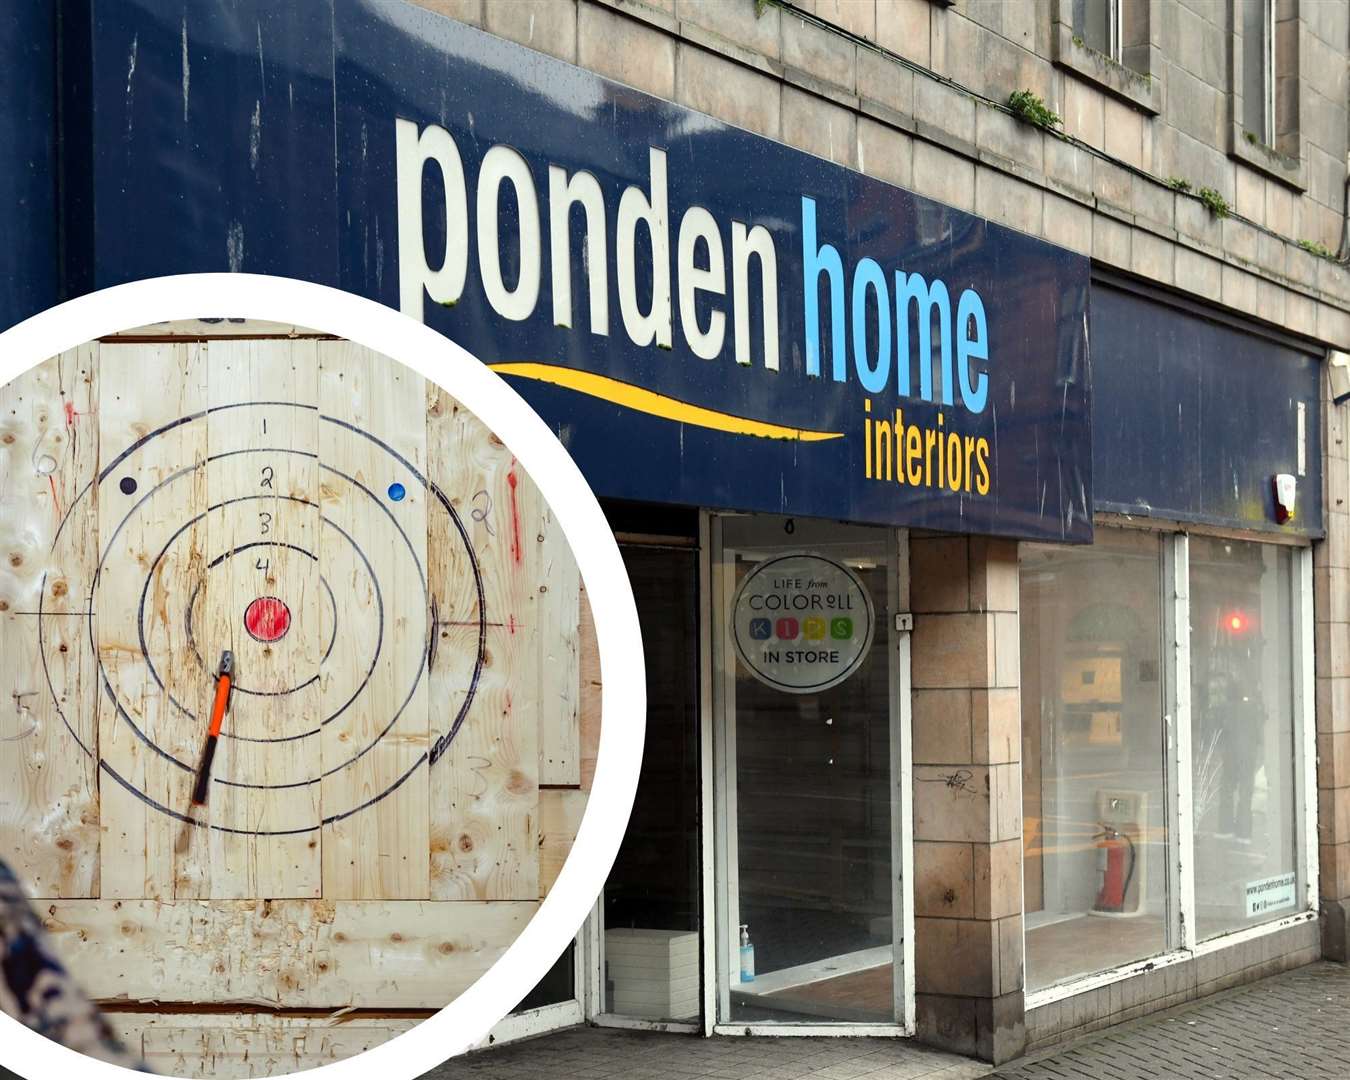 Axe-throwing is listed as a possible feature for the proposed new bar inside the vacated Ponden Home Interiors.